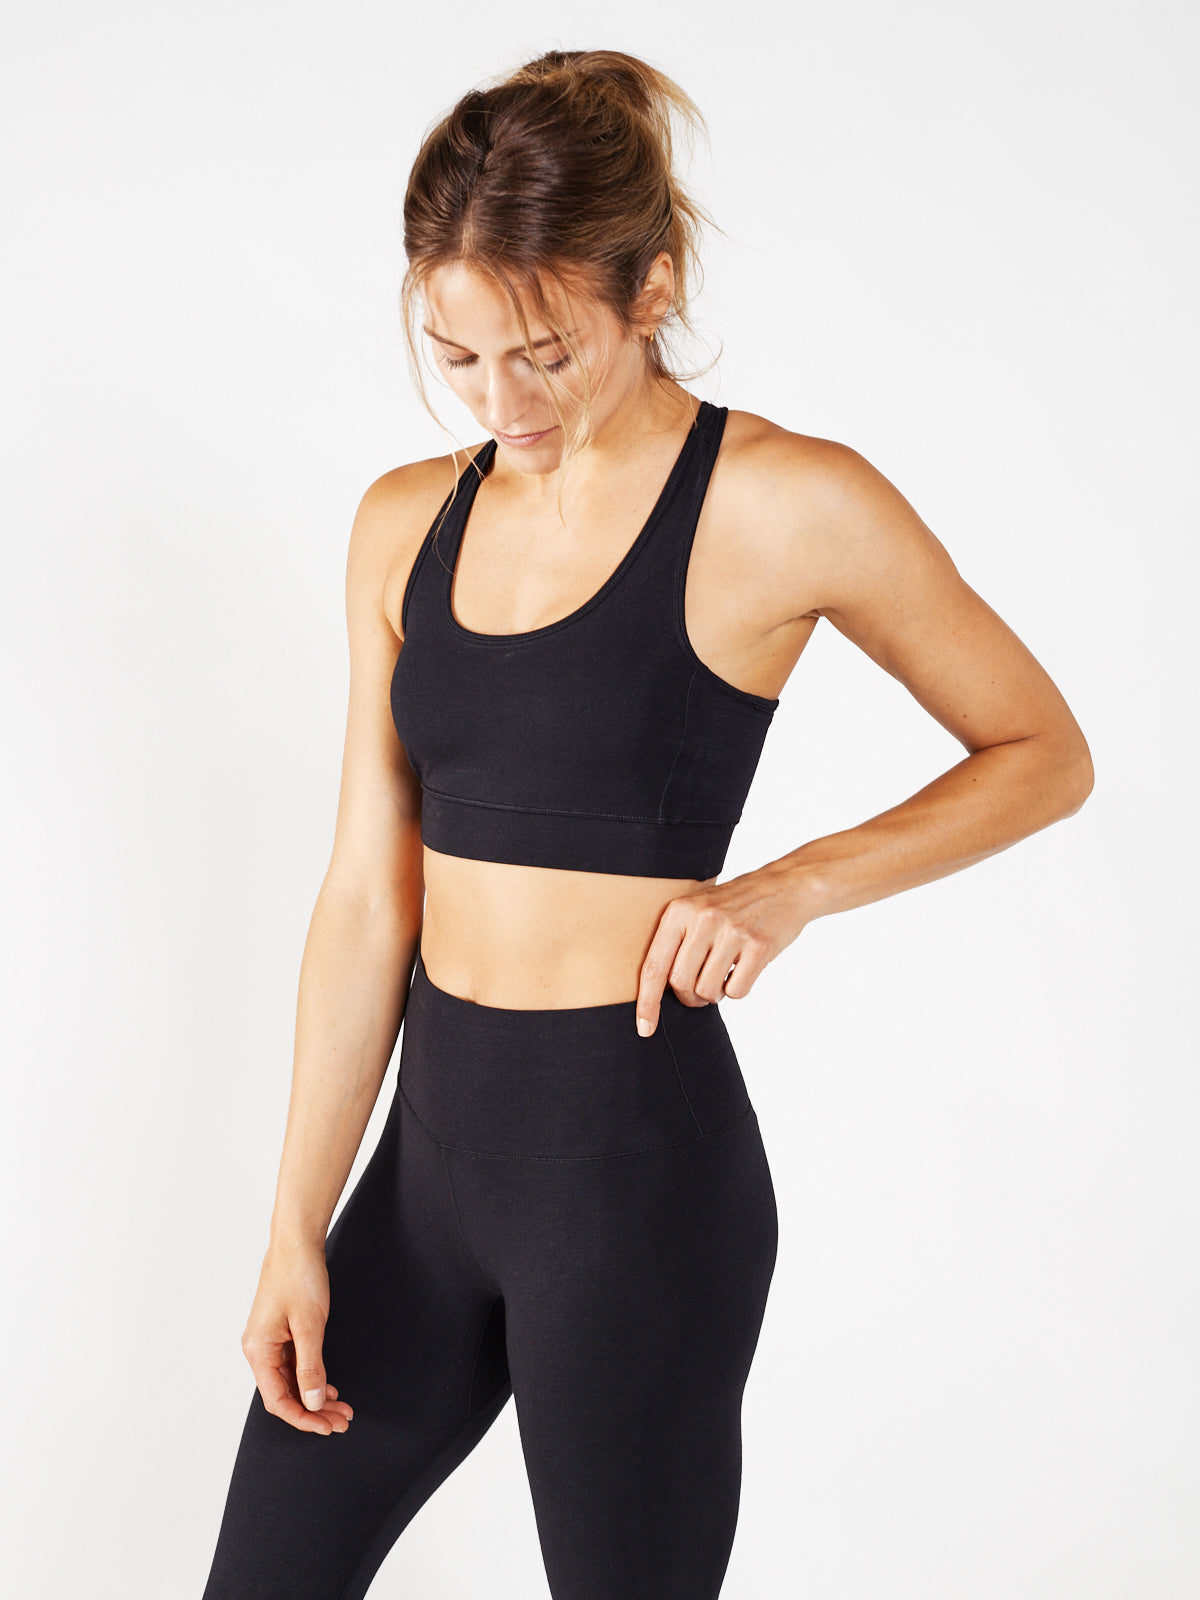 Women's - Fitted Fit Sport Bras or Leggings or Pants or Vests in Black or  White or Yellow or Blue for Training or Running